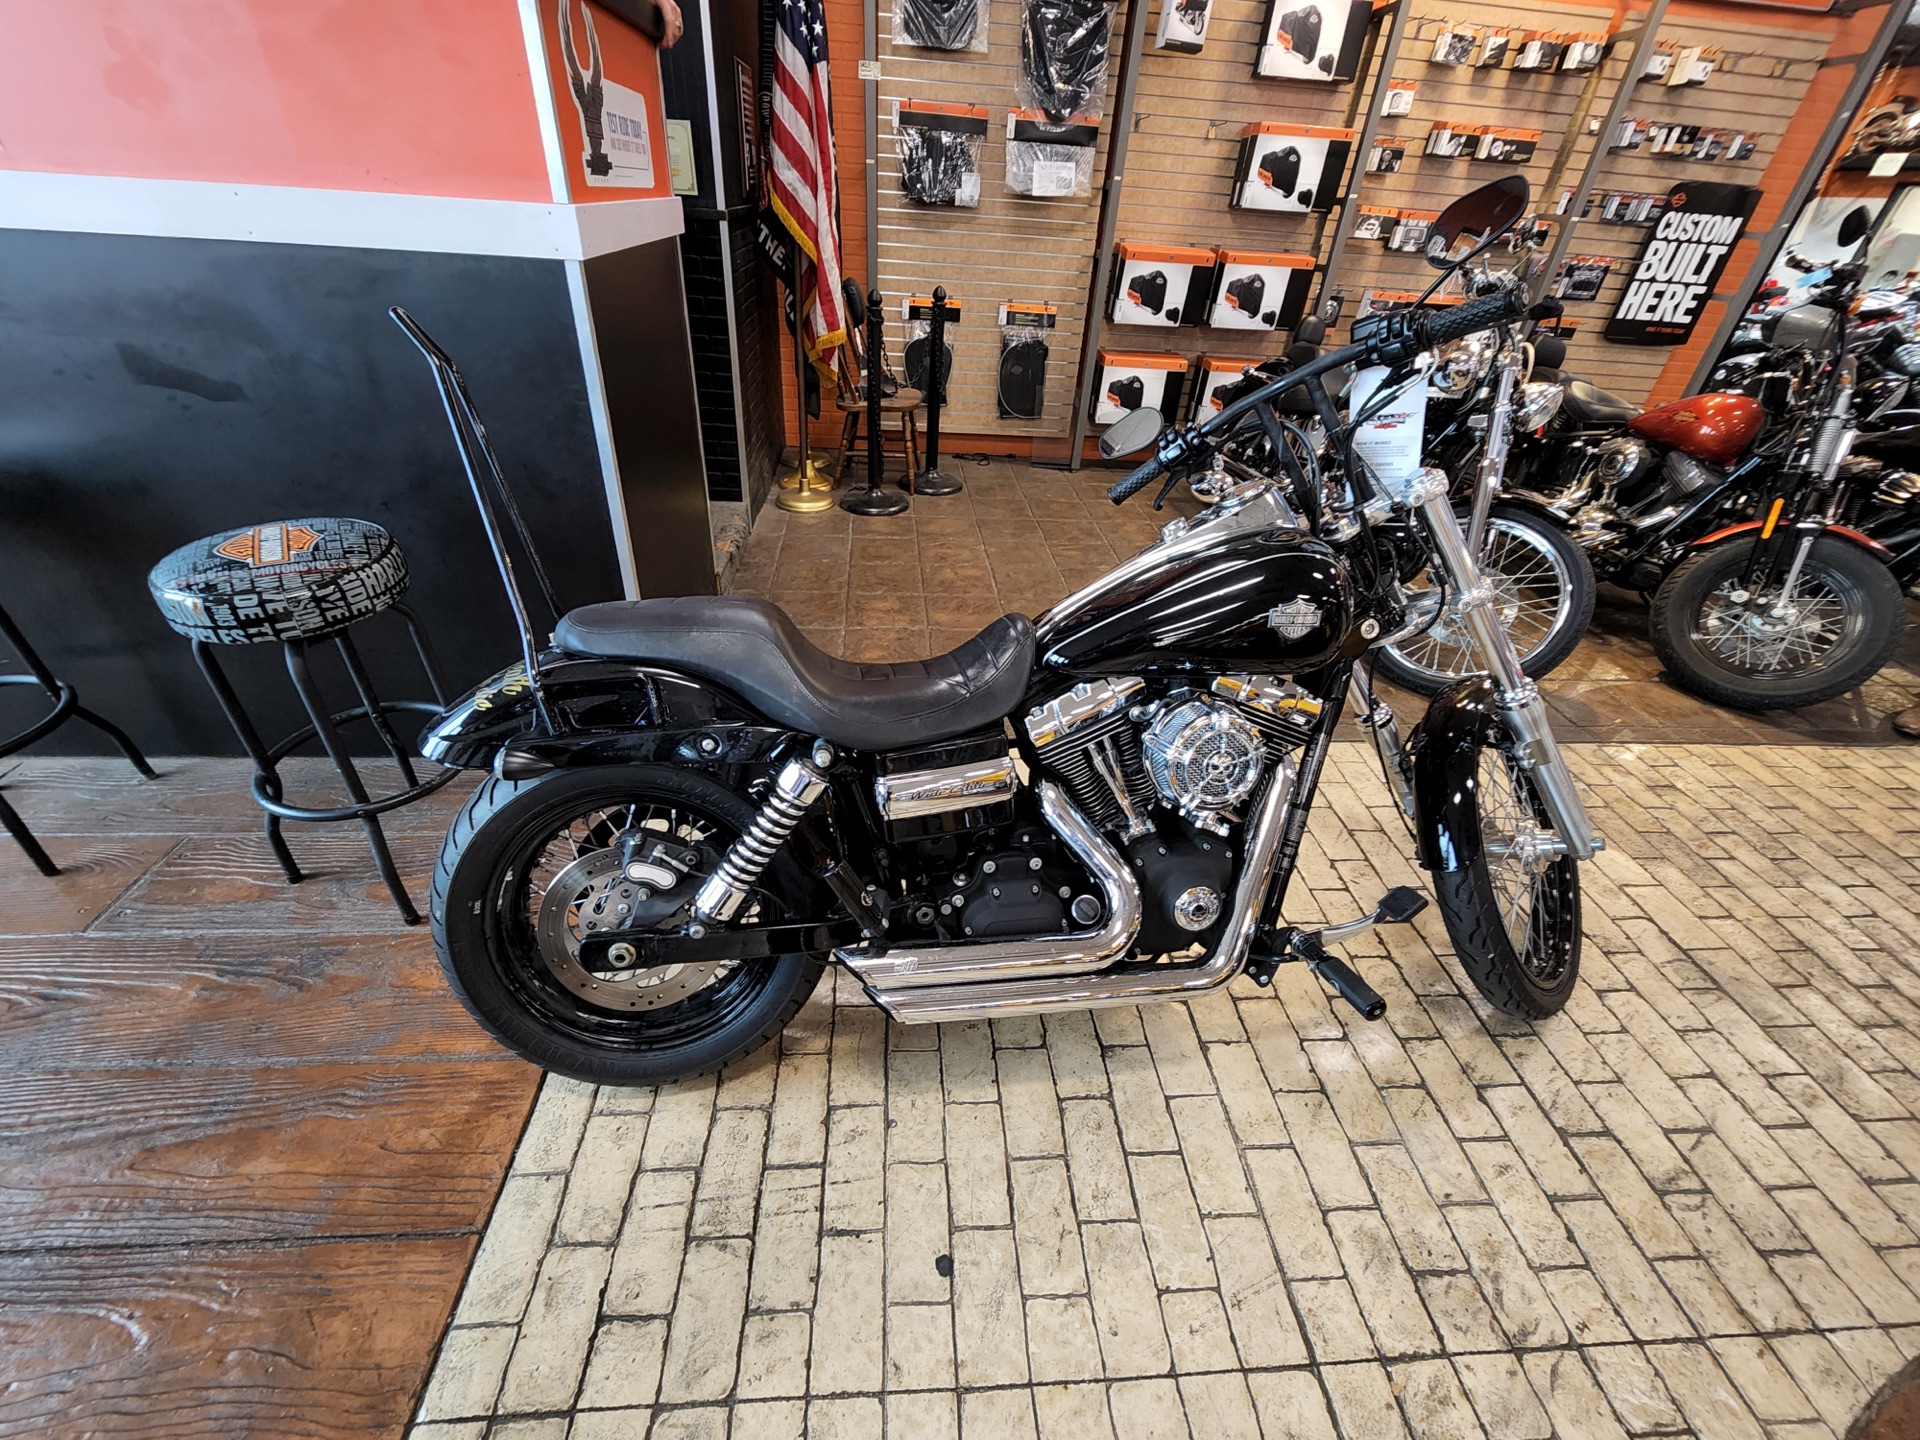 2013 Harley-Davidson FXDWG 103 Dyna Wide Glide in Marion, Illinois - Photo 2